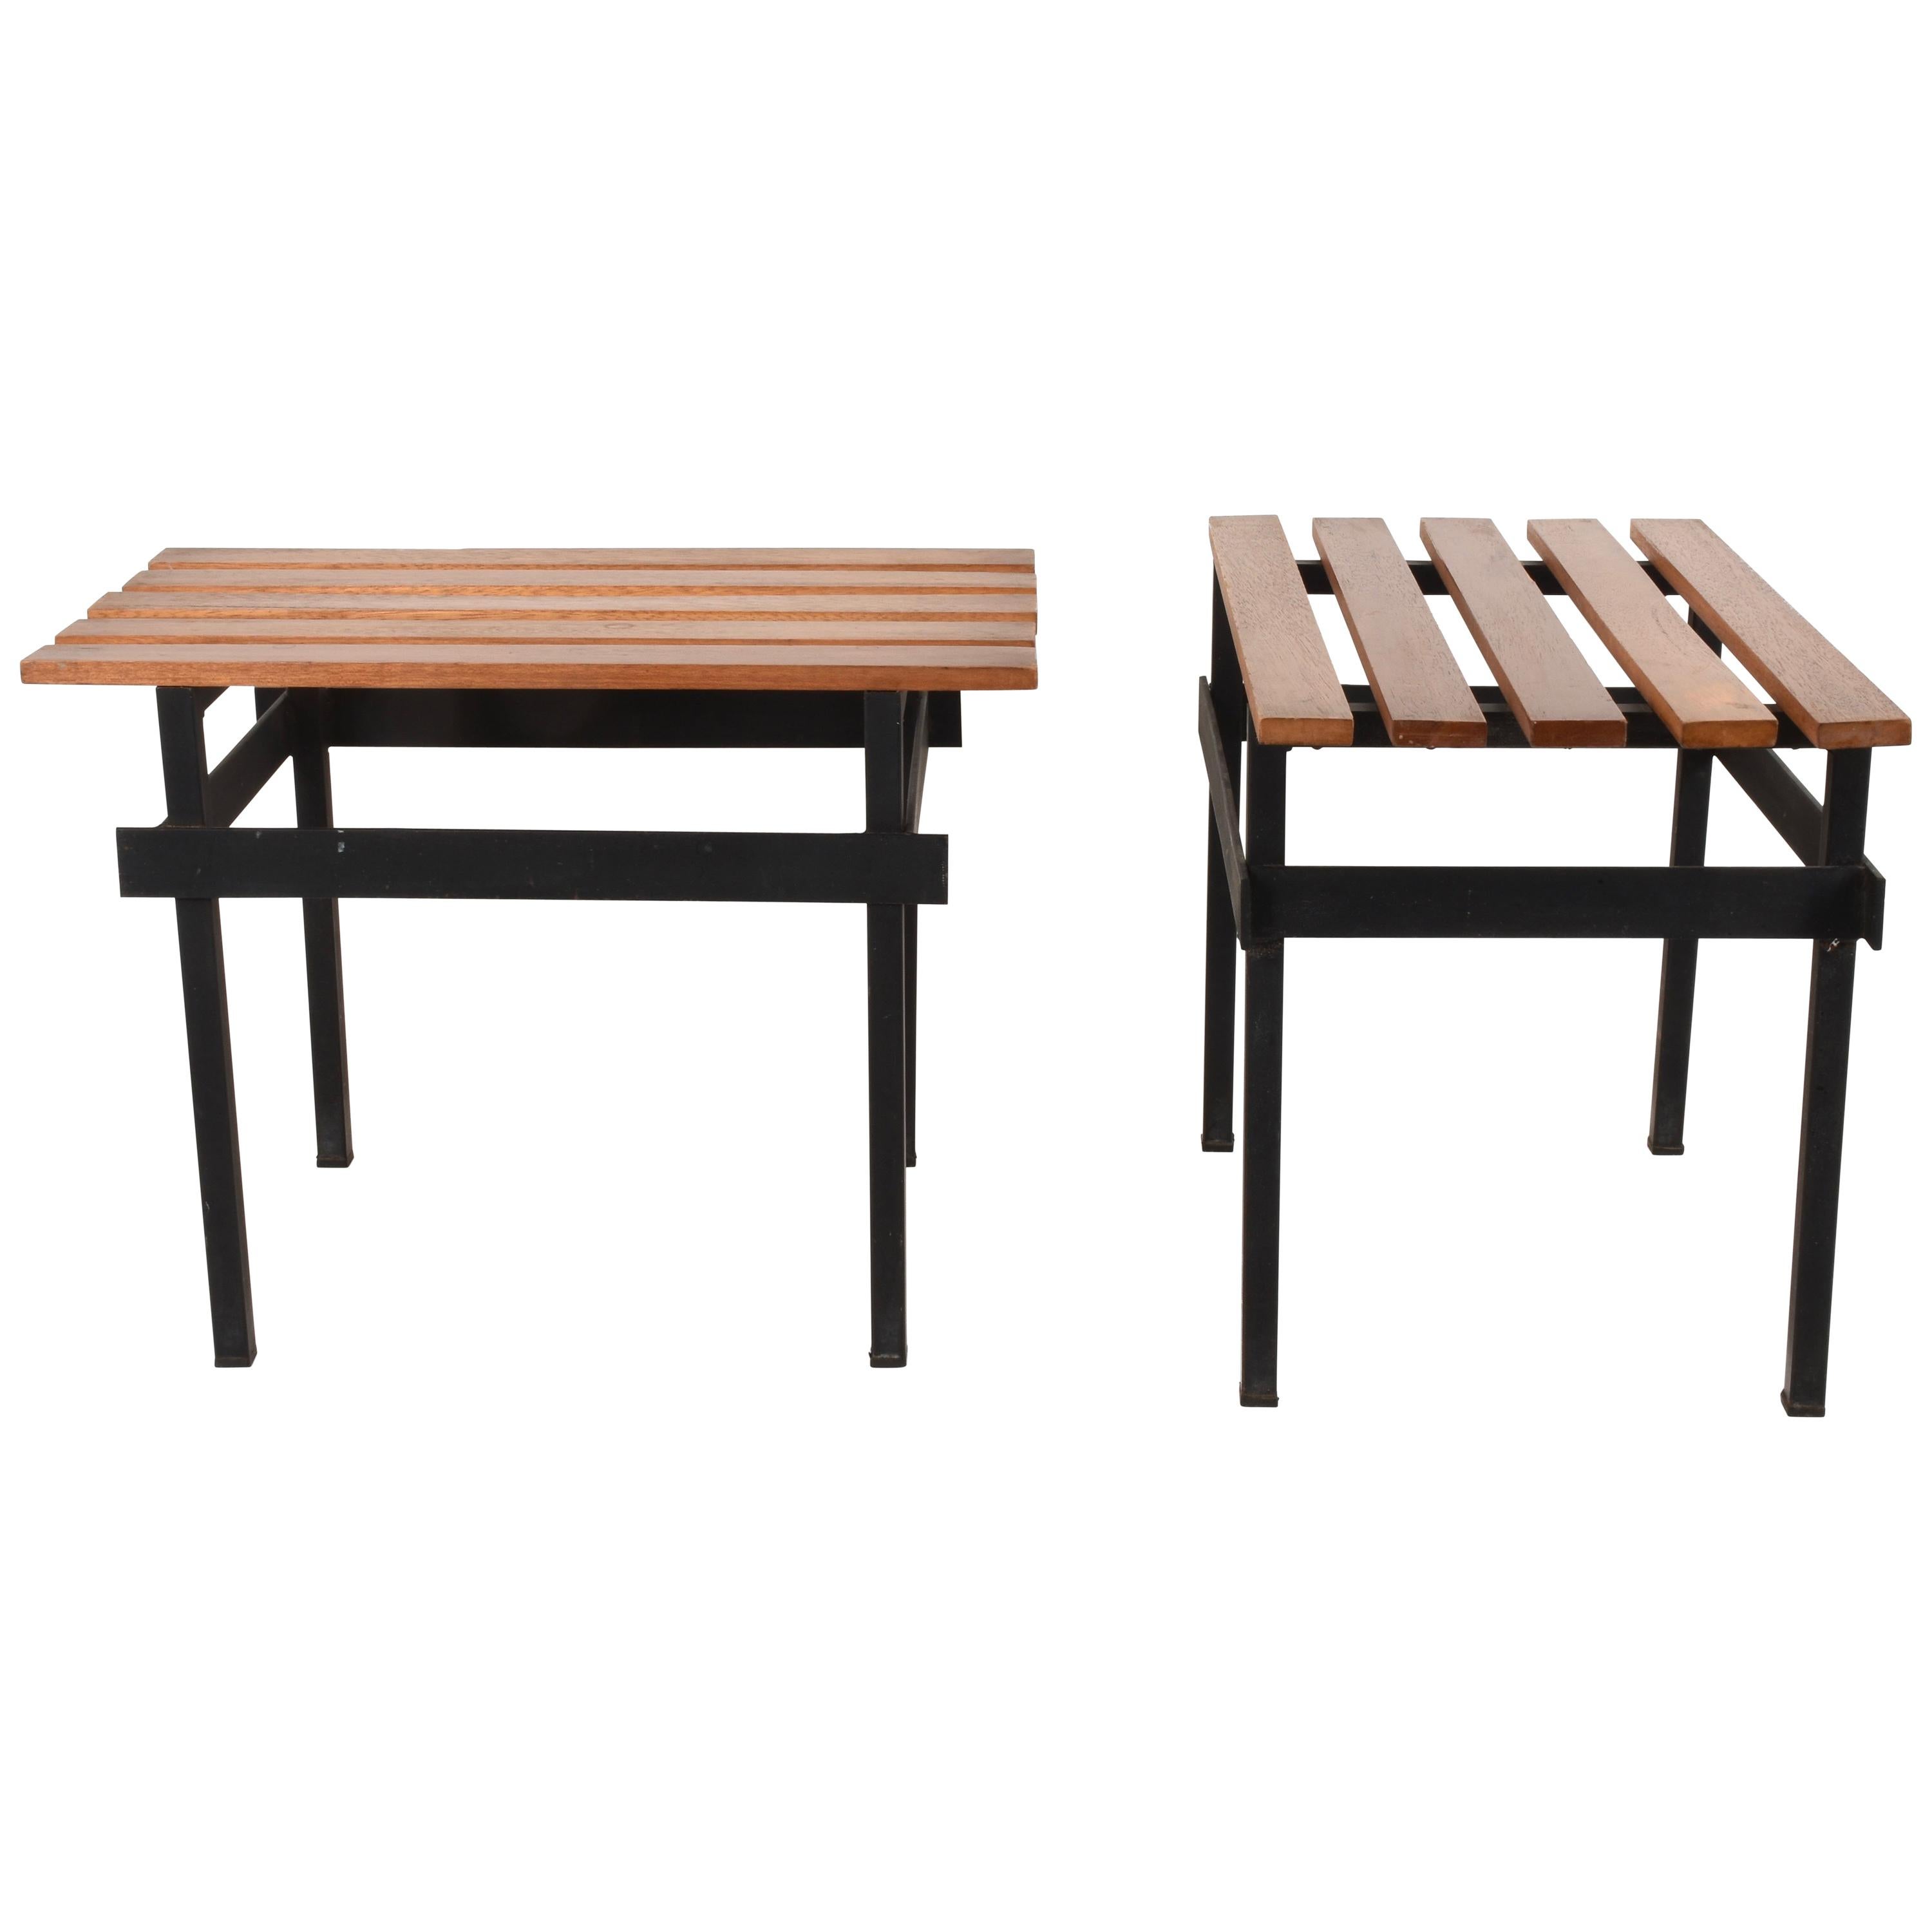 Pair of Teak Wood and Enamelled Metal Benches, Italy, 1960s